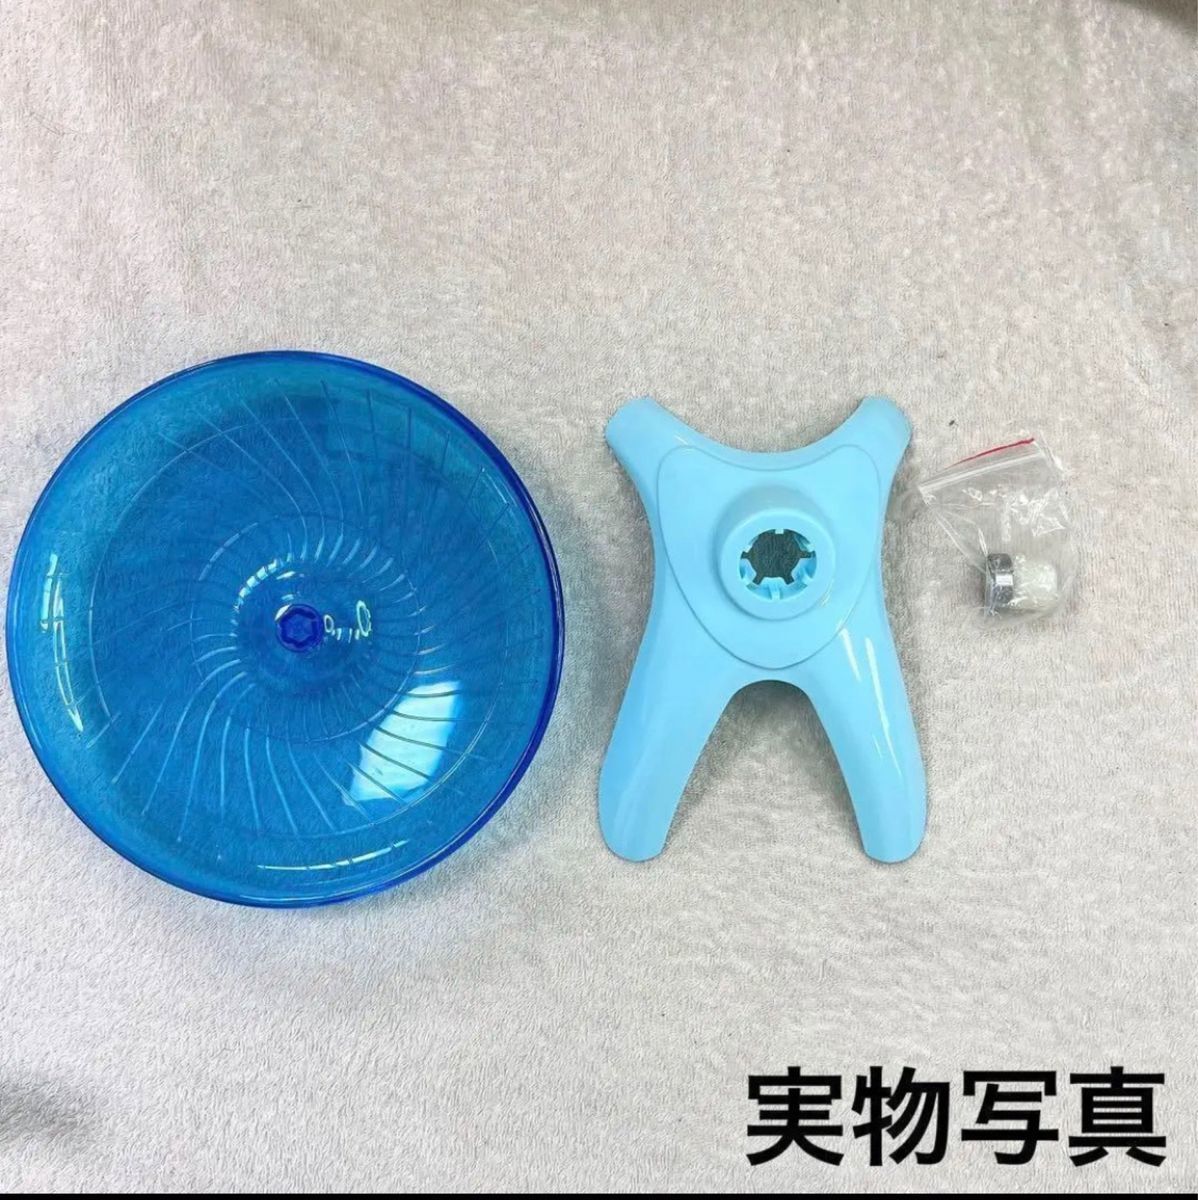  small animals hamster hamster wheel runs toy flying saucer pet quiet sound clear motion shortage cancellation -stroke less cancellation pet accessories blue 